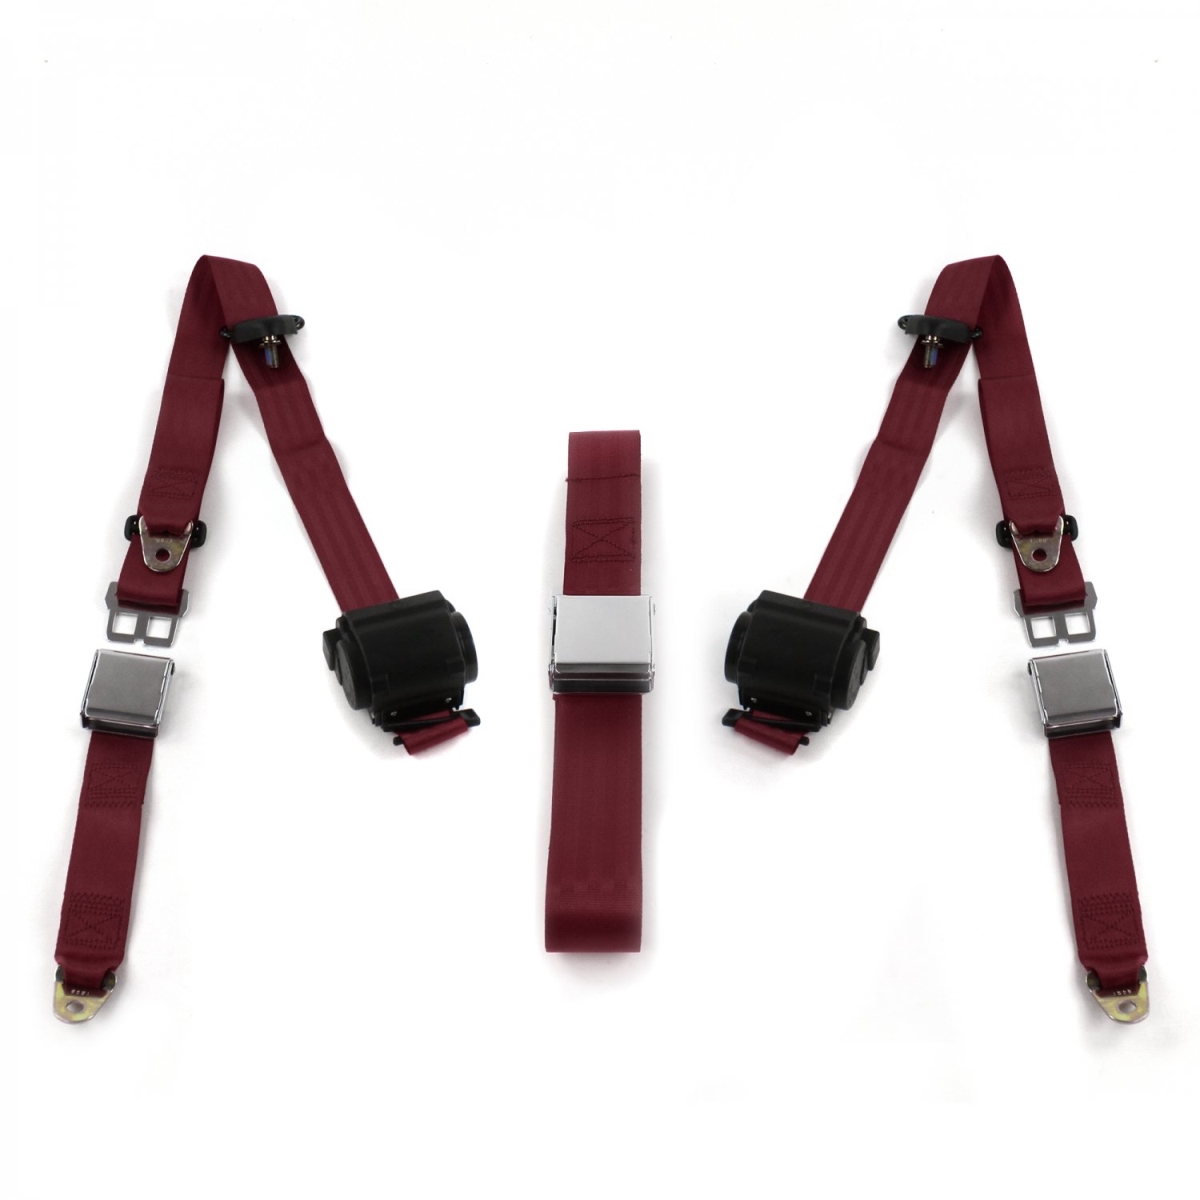 675735 Chevy Chevelle 1964-1967 Airplane 3 Point Burgandy Retractable Bench Seat Belt Kit - 3 Belts -  safeTboy